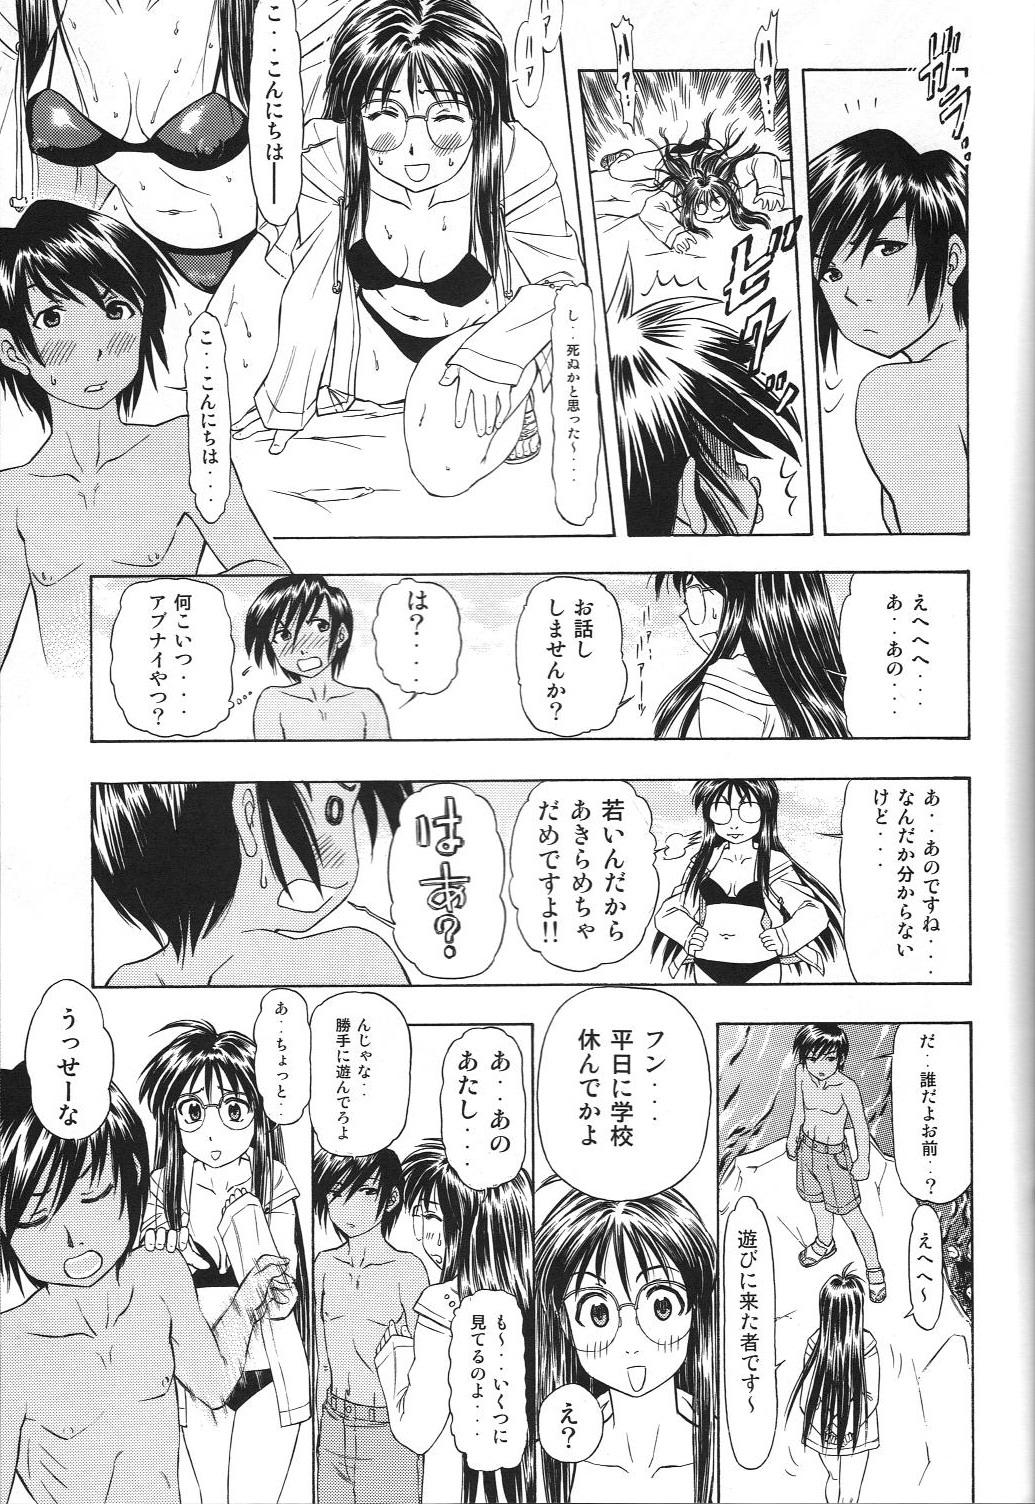 Heels TAIHO++ file02 - Youre under arrest 1080p - Page 12